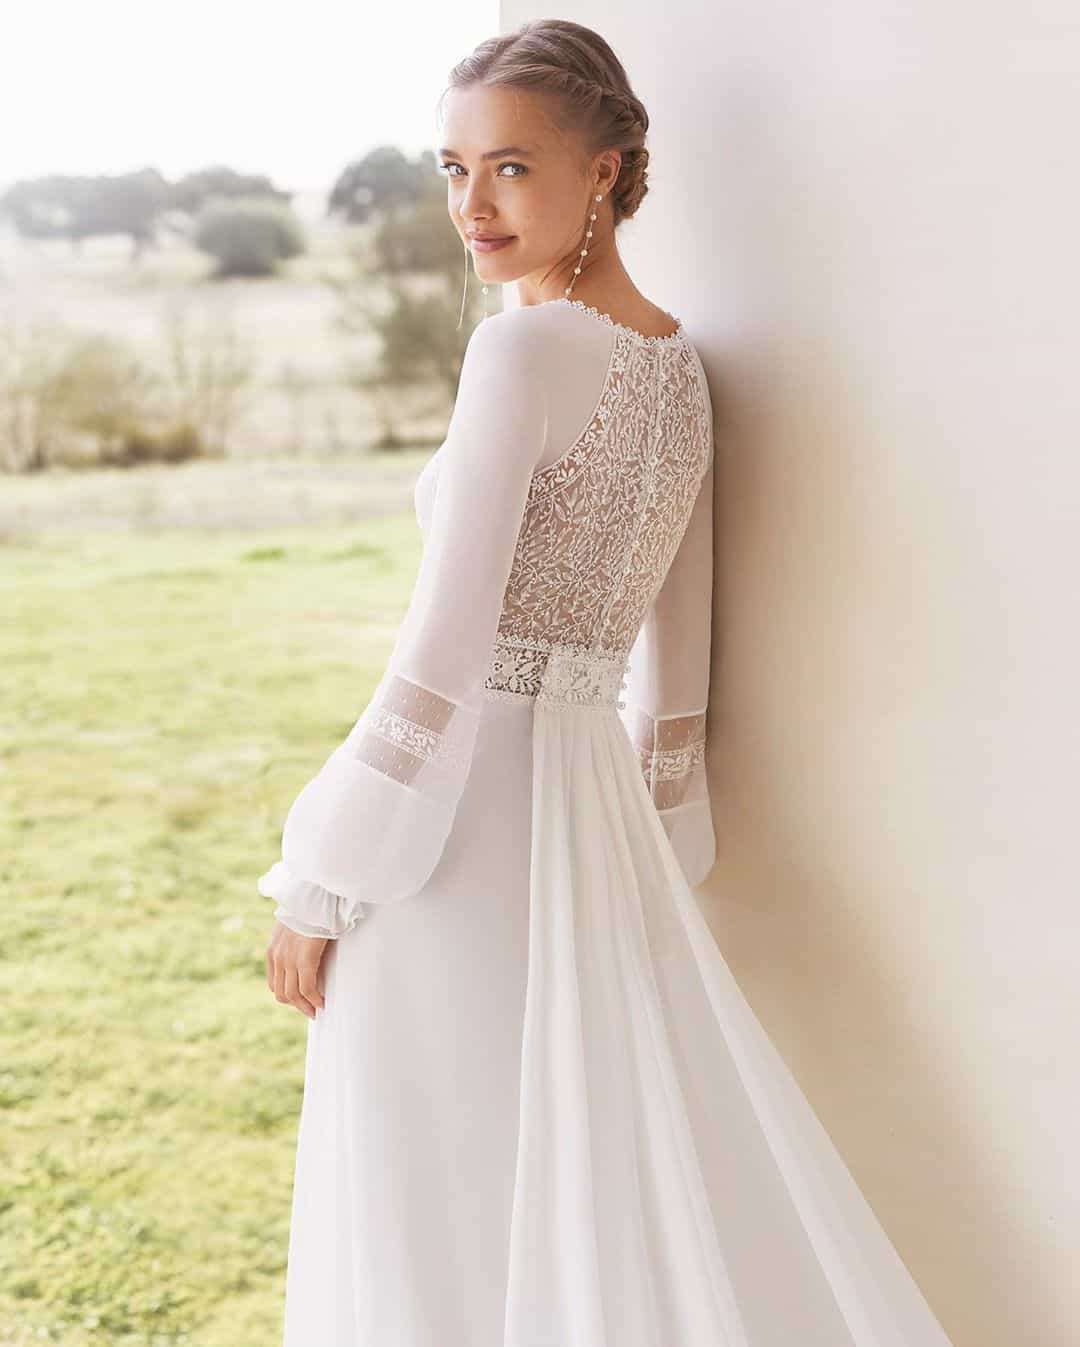 Specially Outstanding and Authentic Wedding Dresses by Rosa Clará